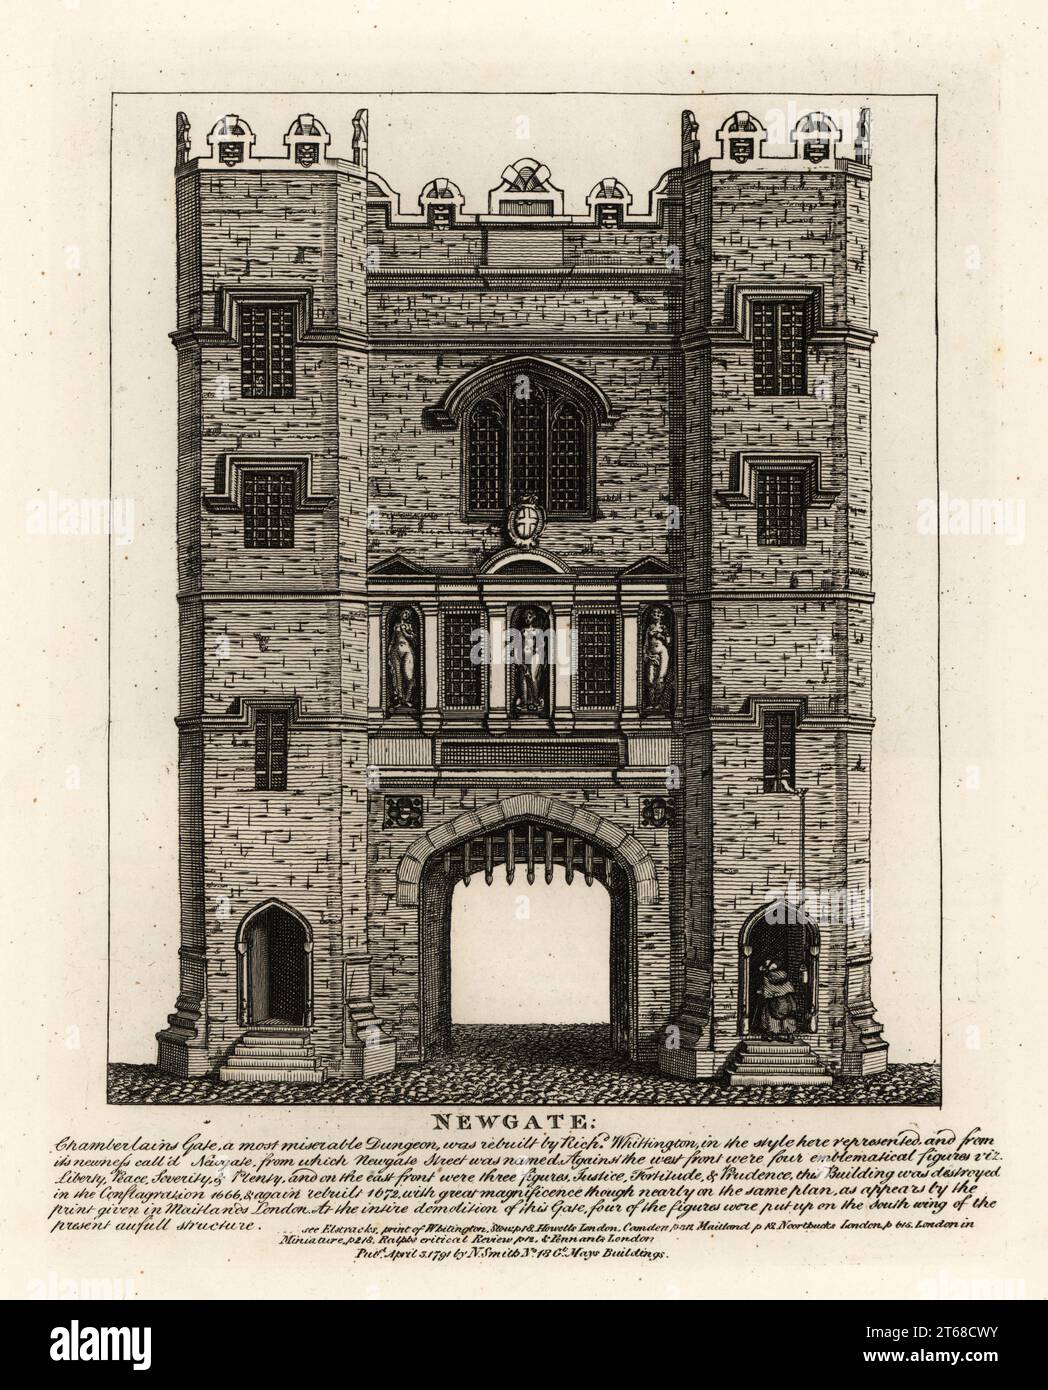 Newgate, rebuilt in 1672 after the Fire of London, with three figures Justice, Fortitude and Prudence from the former gate built by Mayor of London Richard Wittington. Copperplate engraving by John Thomas Smith after original drawings by members of the Society of Antiquaries from his J.T. Smiths Antiquities of London and its Environs, J. Sewell, R. Folder, J. Simco, London, 1791. Stock Photo